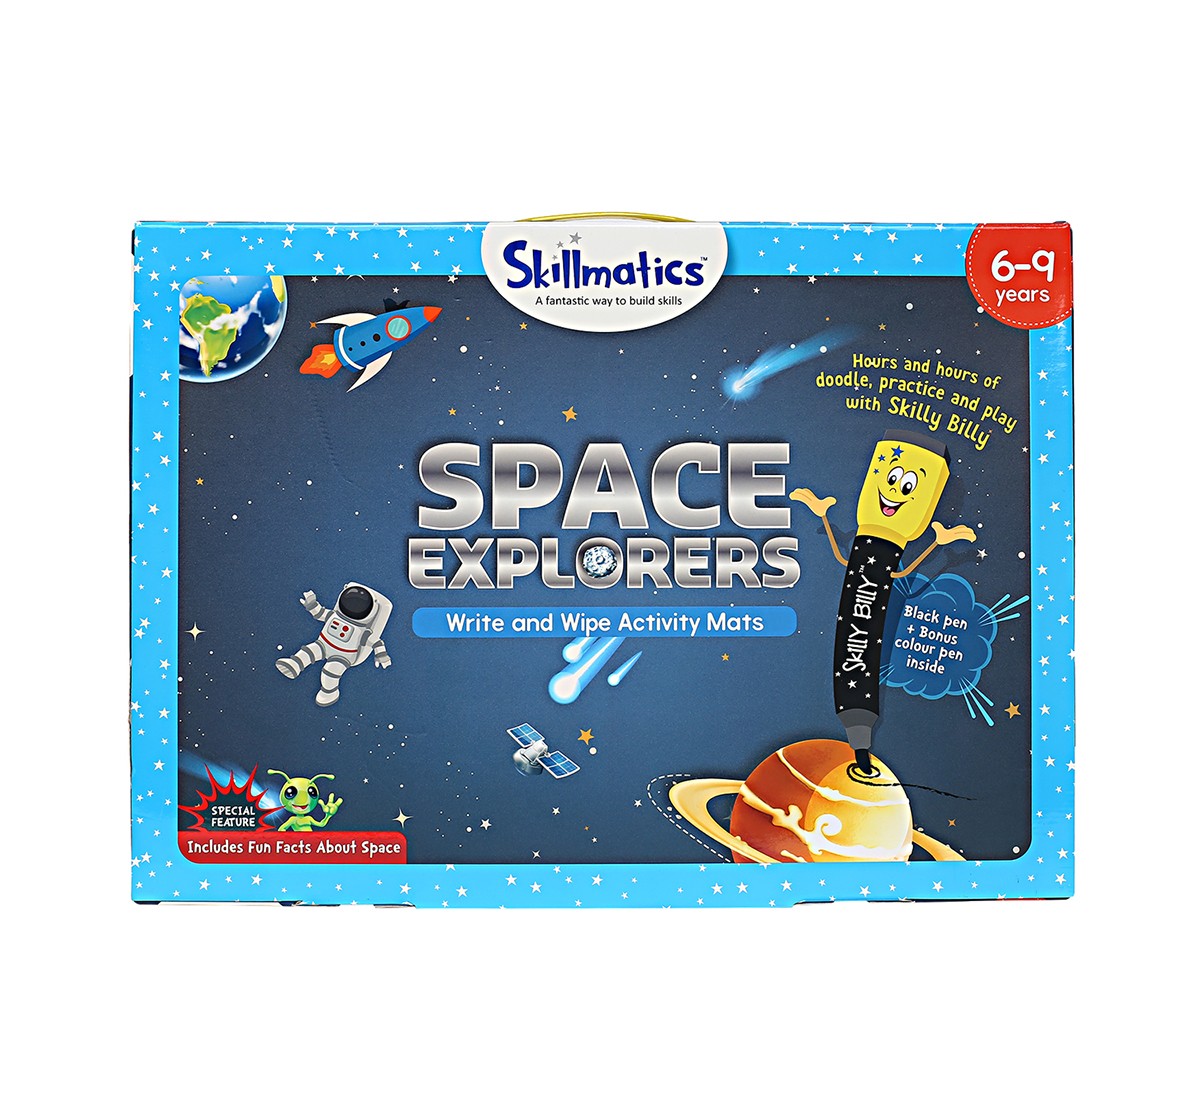  Skillmatics Educational Game Space Explorers 6-9 Years, Multi Color Games for Kids age 6Y+ 